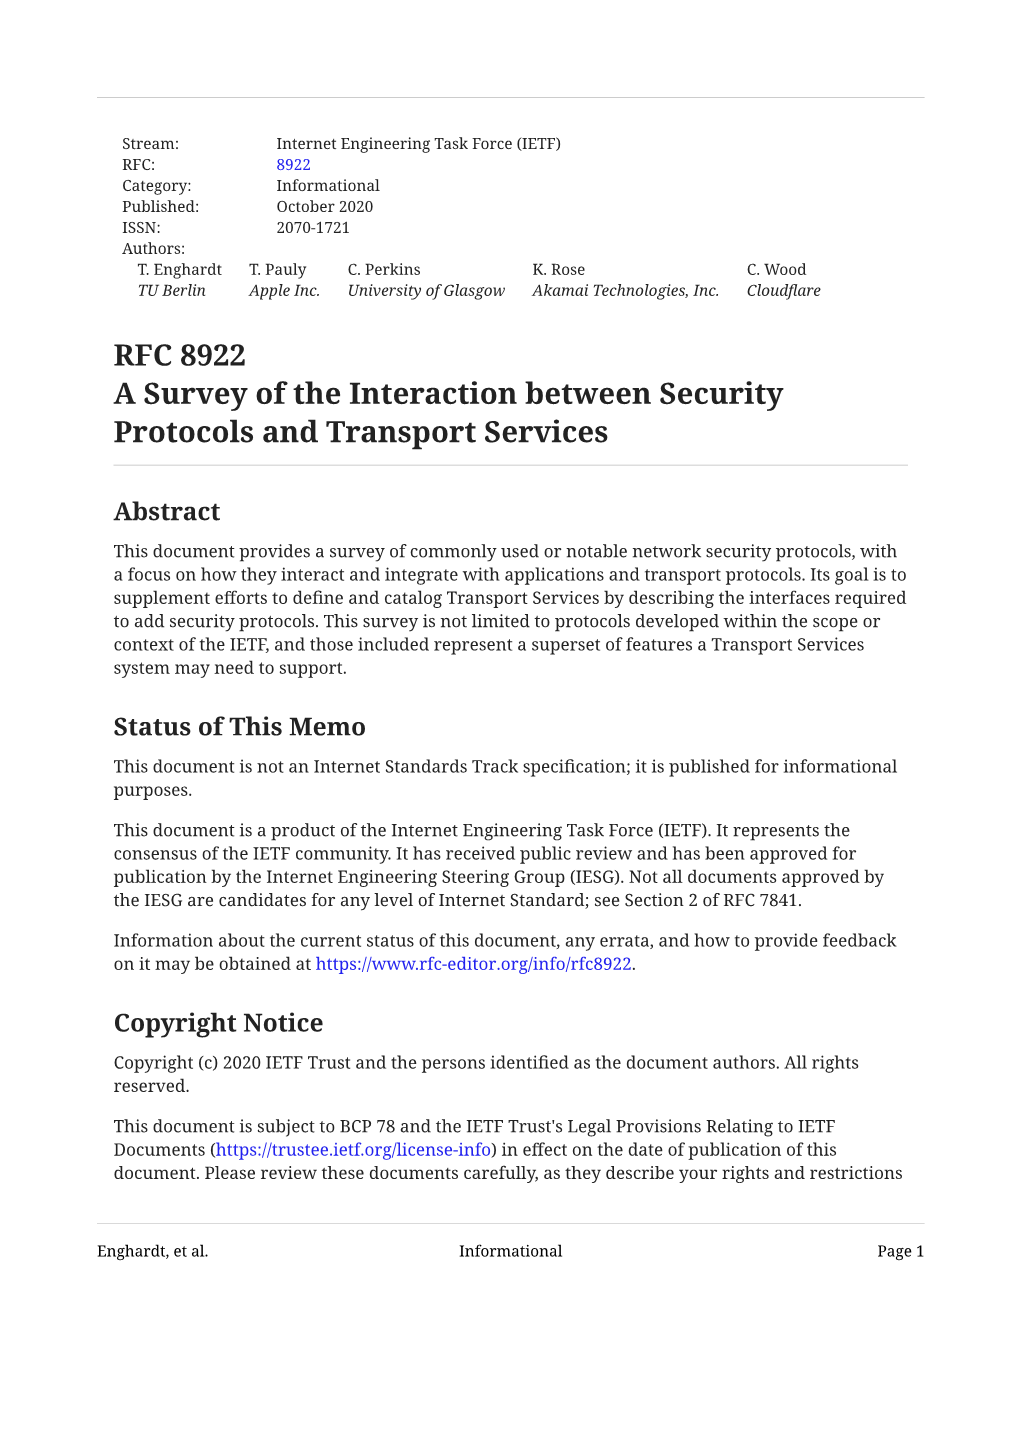 RFC 8922: a Survey of the Interaction Between Security Protocols And